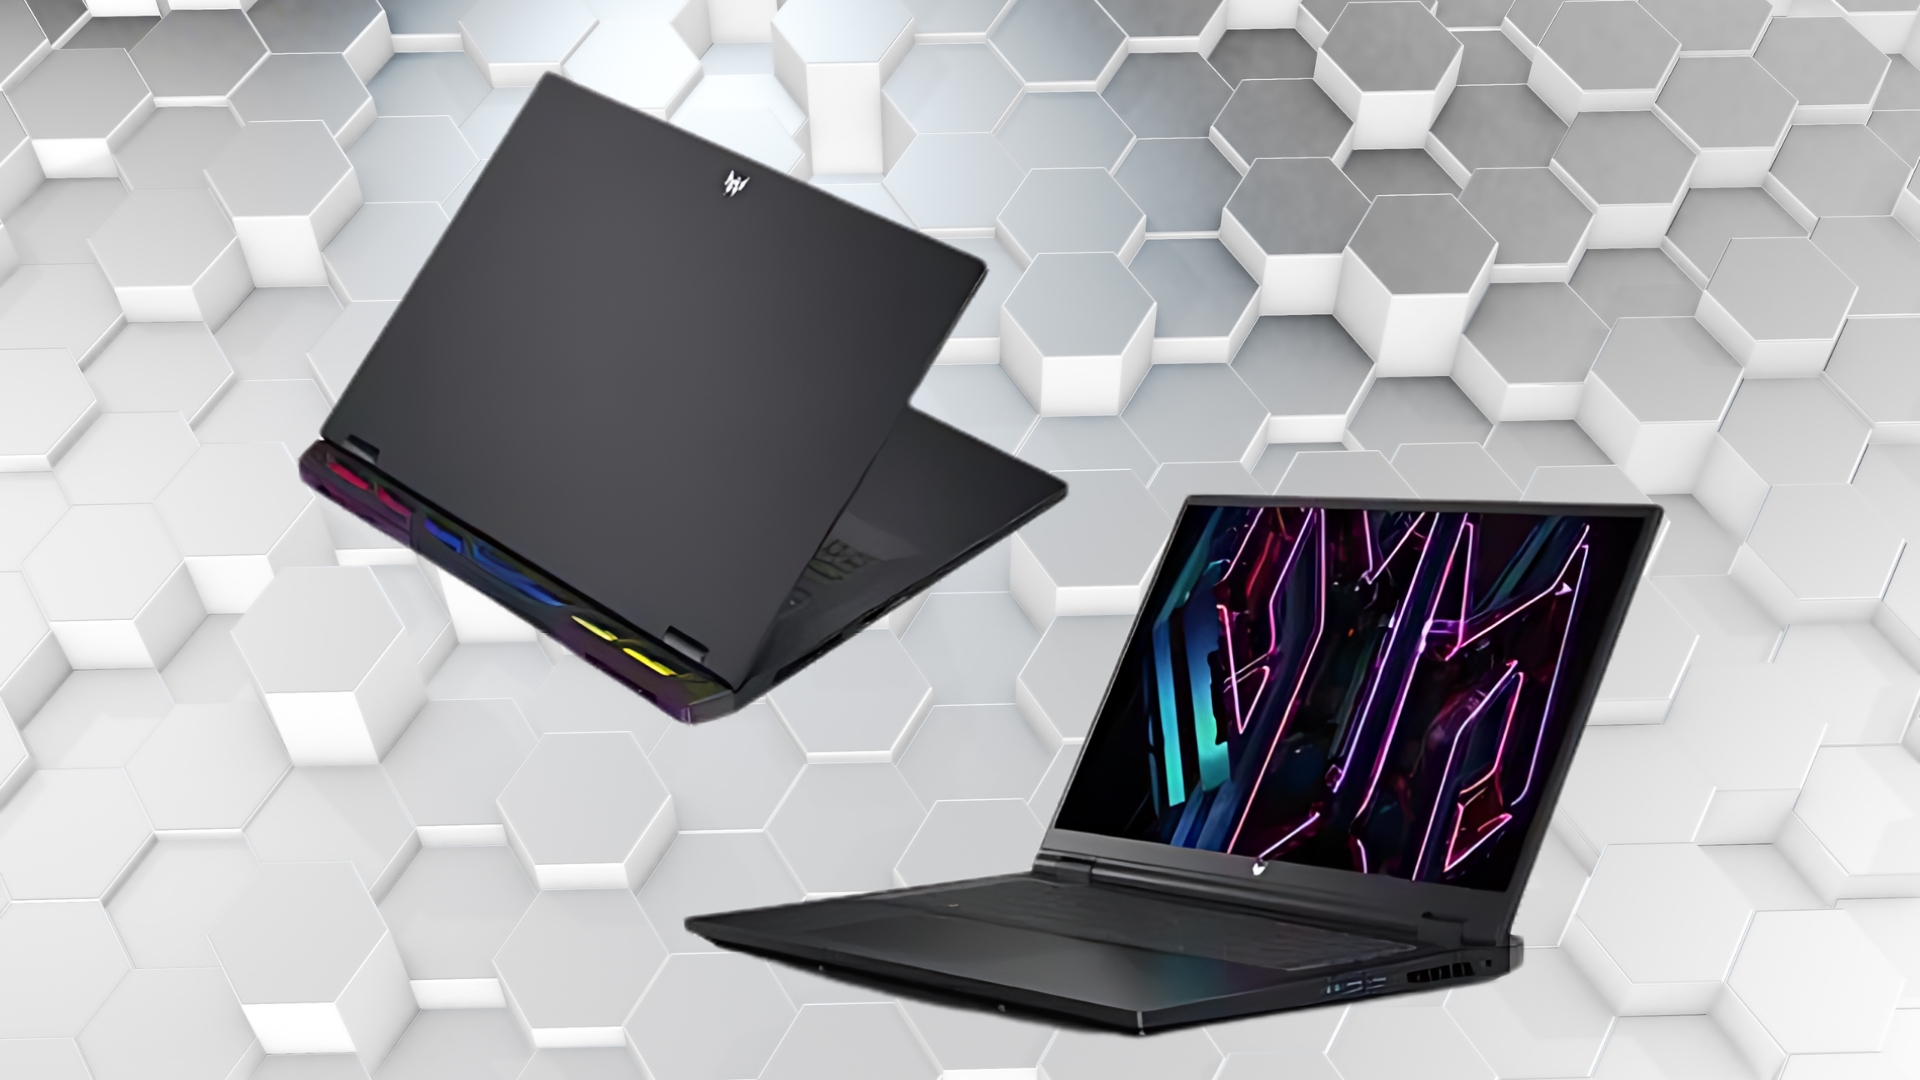 Top-Rated 3 Gaming Laptops Under $600 You Can Actually Buy